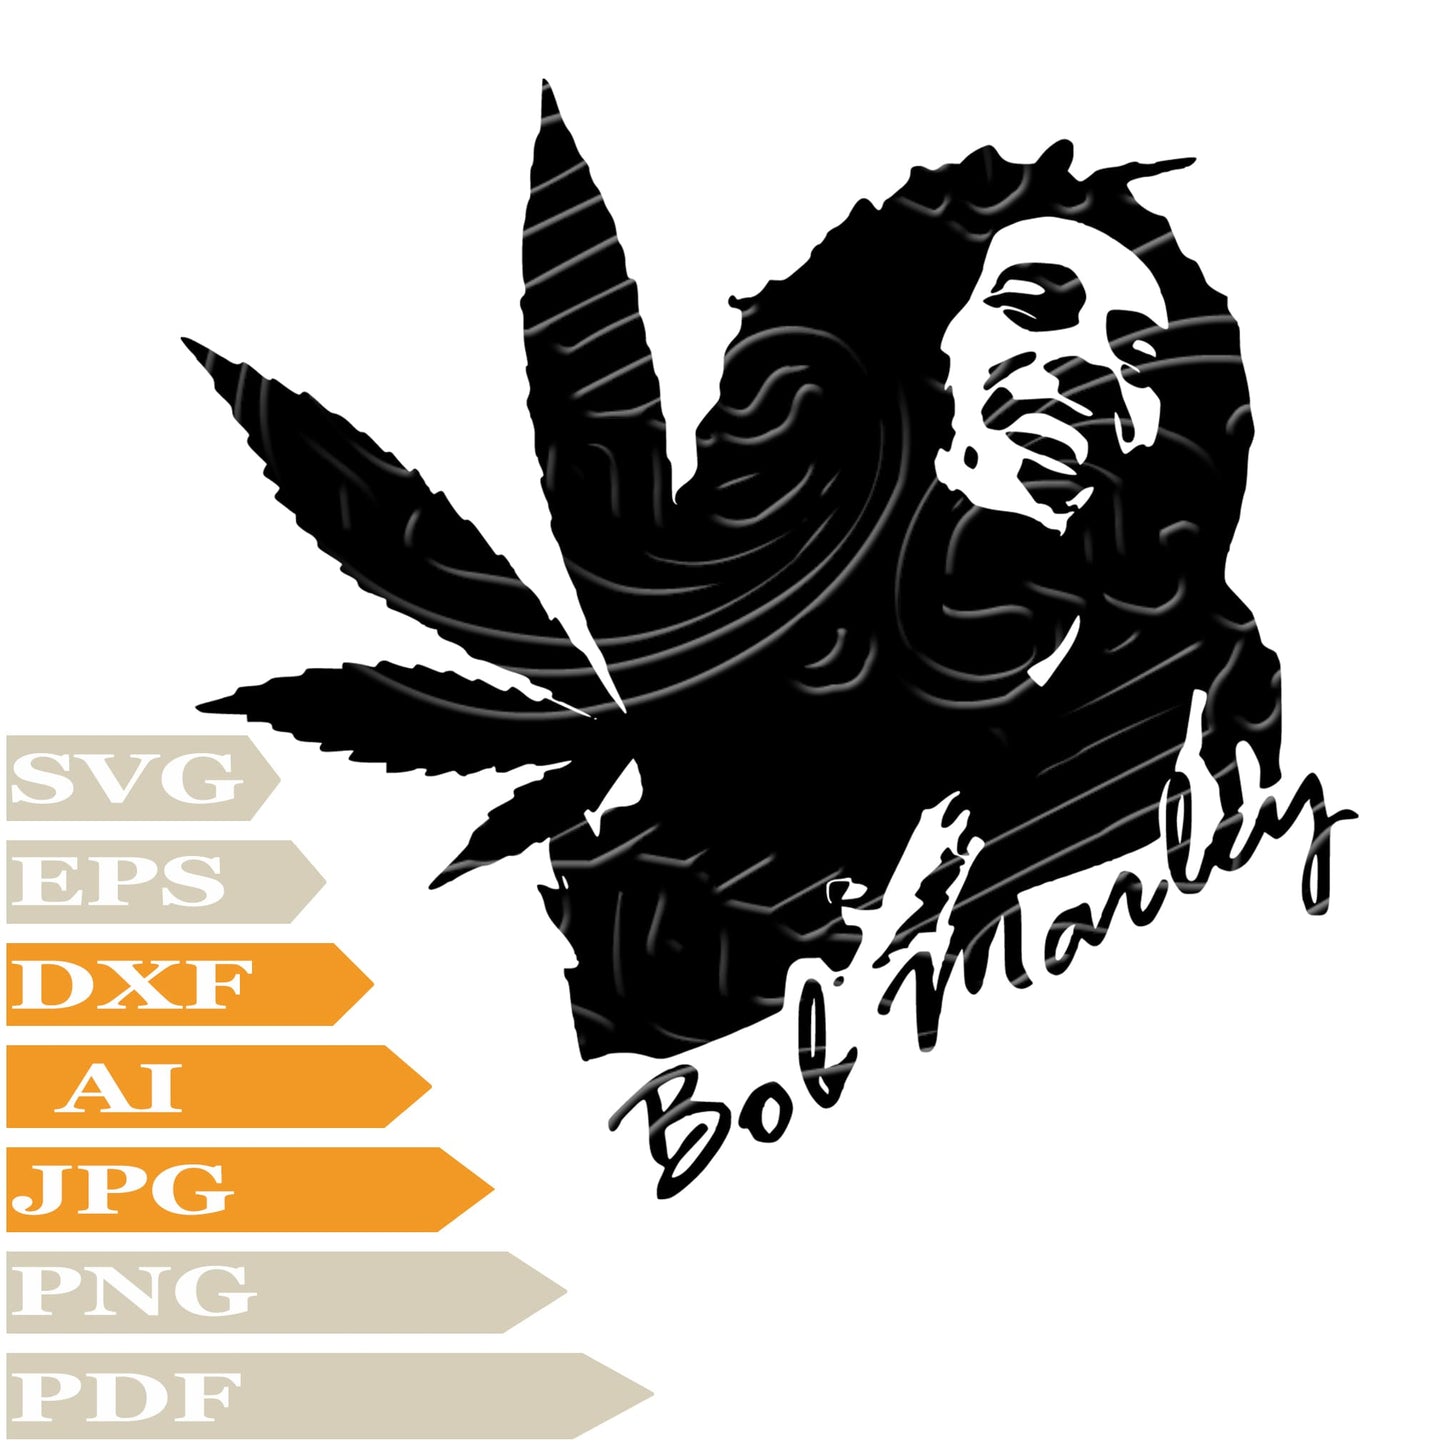 Bob Marley Bob Marley One Love Svg File, Image Cut, Png, For Tattoo, Silhouette, Digital Vector Download, Cut File, Clipart, For Cricut